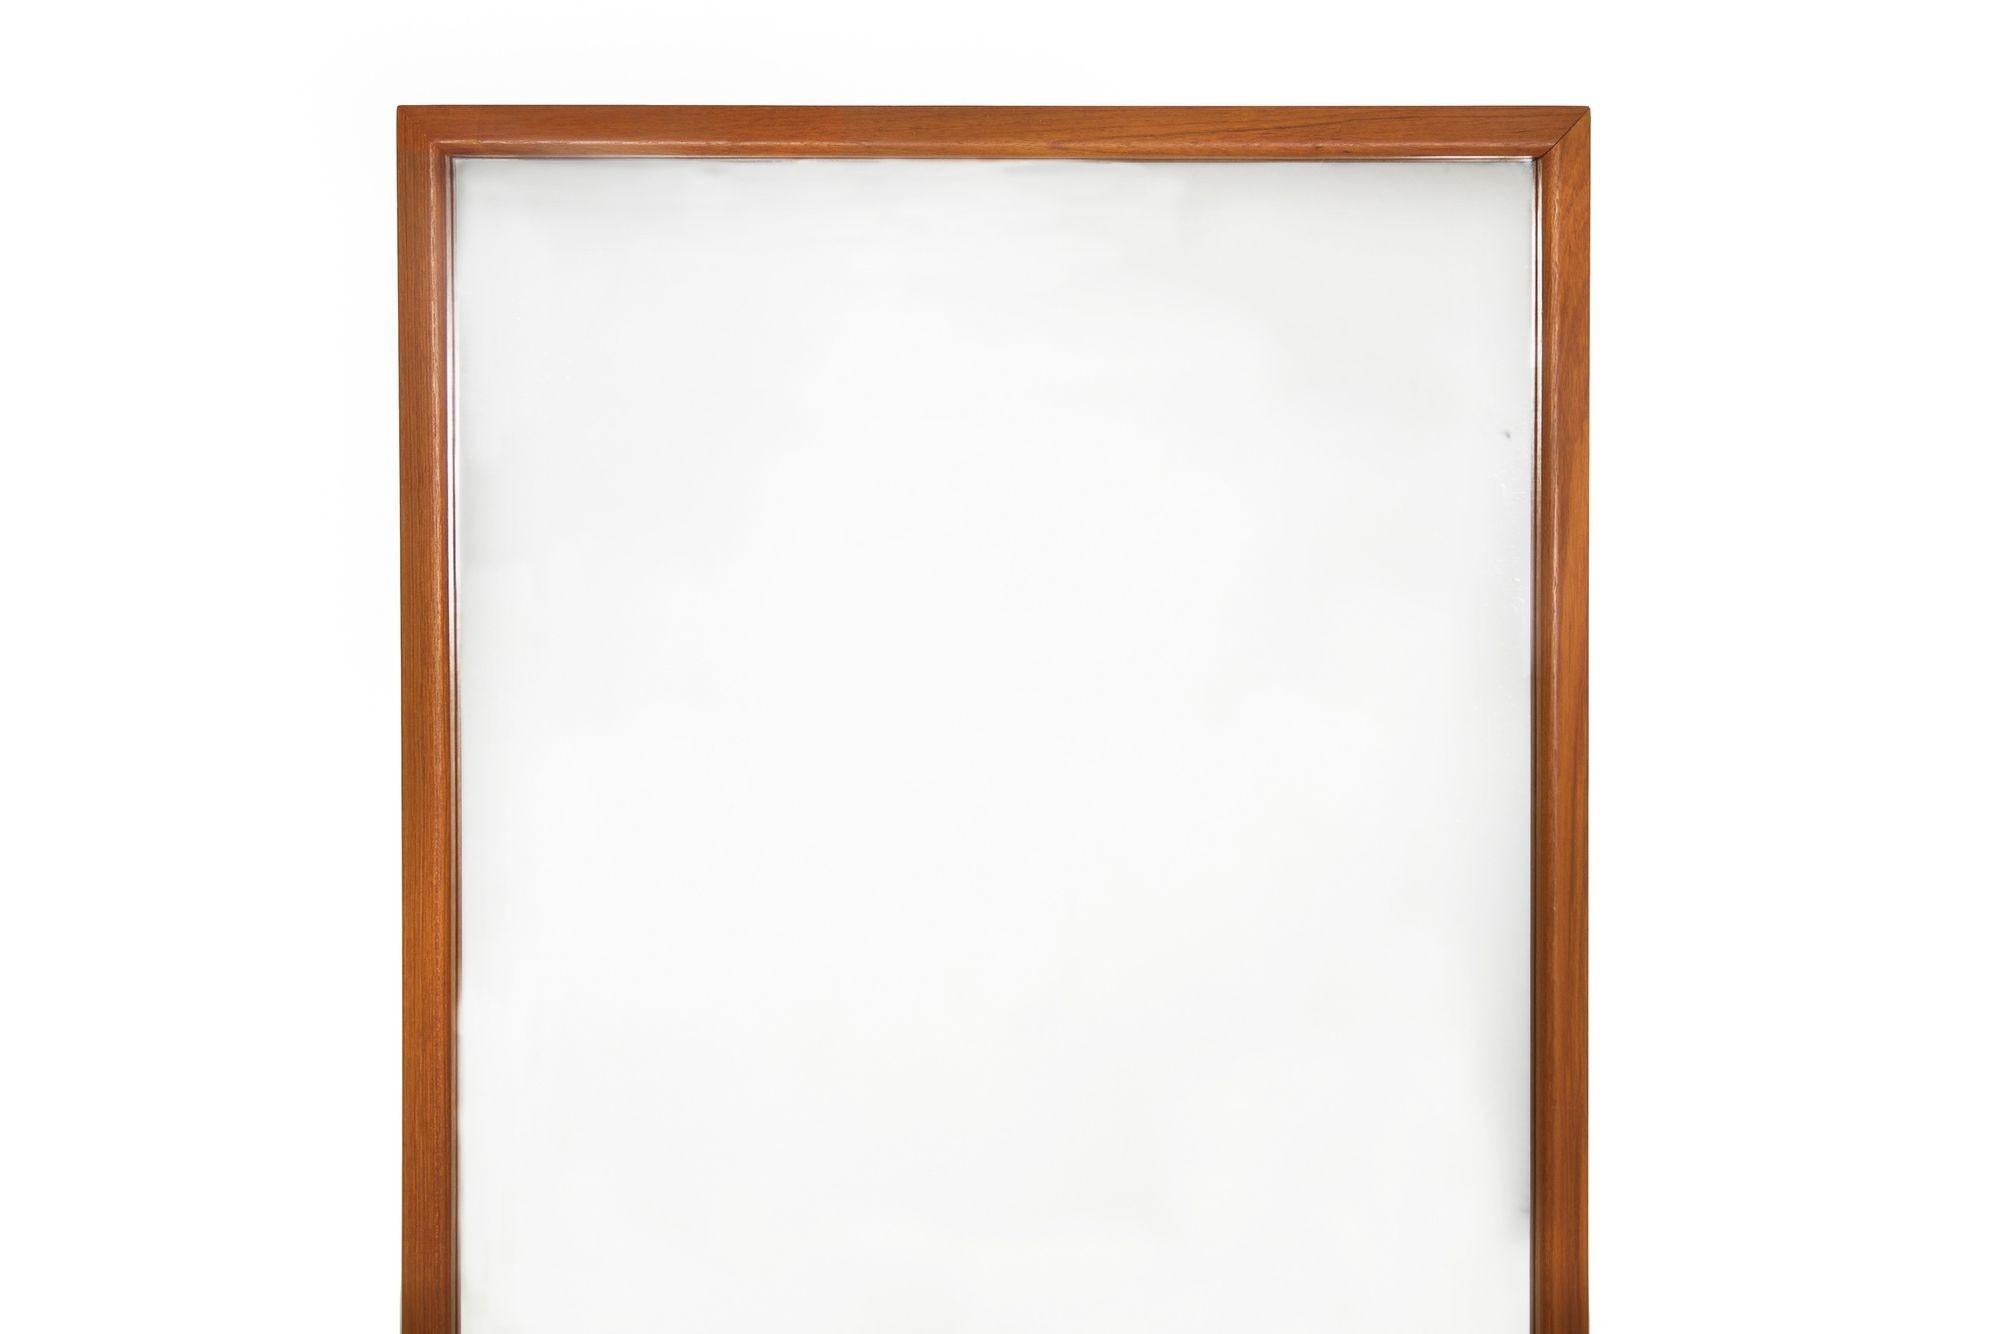 Danish Modern Teak Wall Mirror, Vildbjerg Møbelfabrik circa 1960s
Item # 001XVZ25L

A very sleek and austere molded teak wall mirror by Vildbjerg Møbelfabrik of Denmark. Exhibits tidy lines in the solid teak frame and remains in nearly pristine